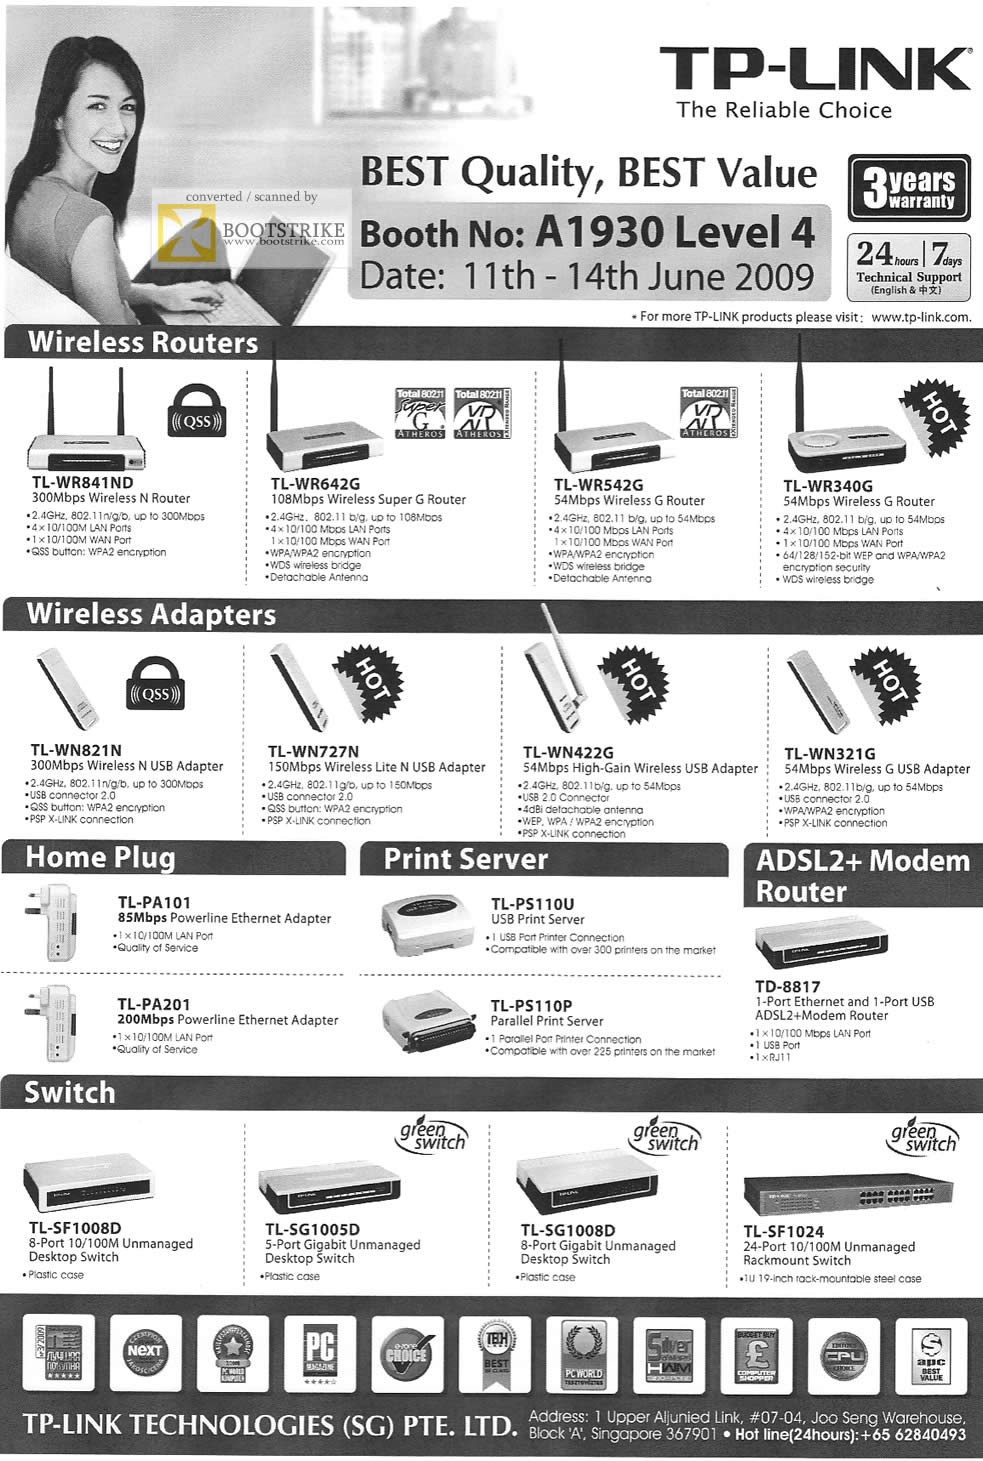 PC Show 2009 price list image brochure of TP-Link Wireless Routers Adapters Home Plug Print Server Switch ADSL